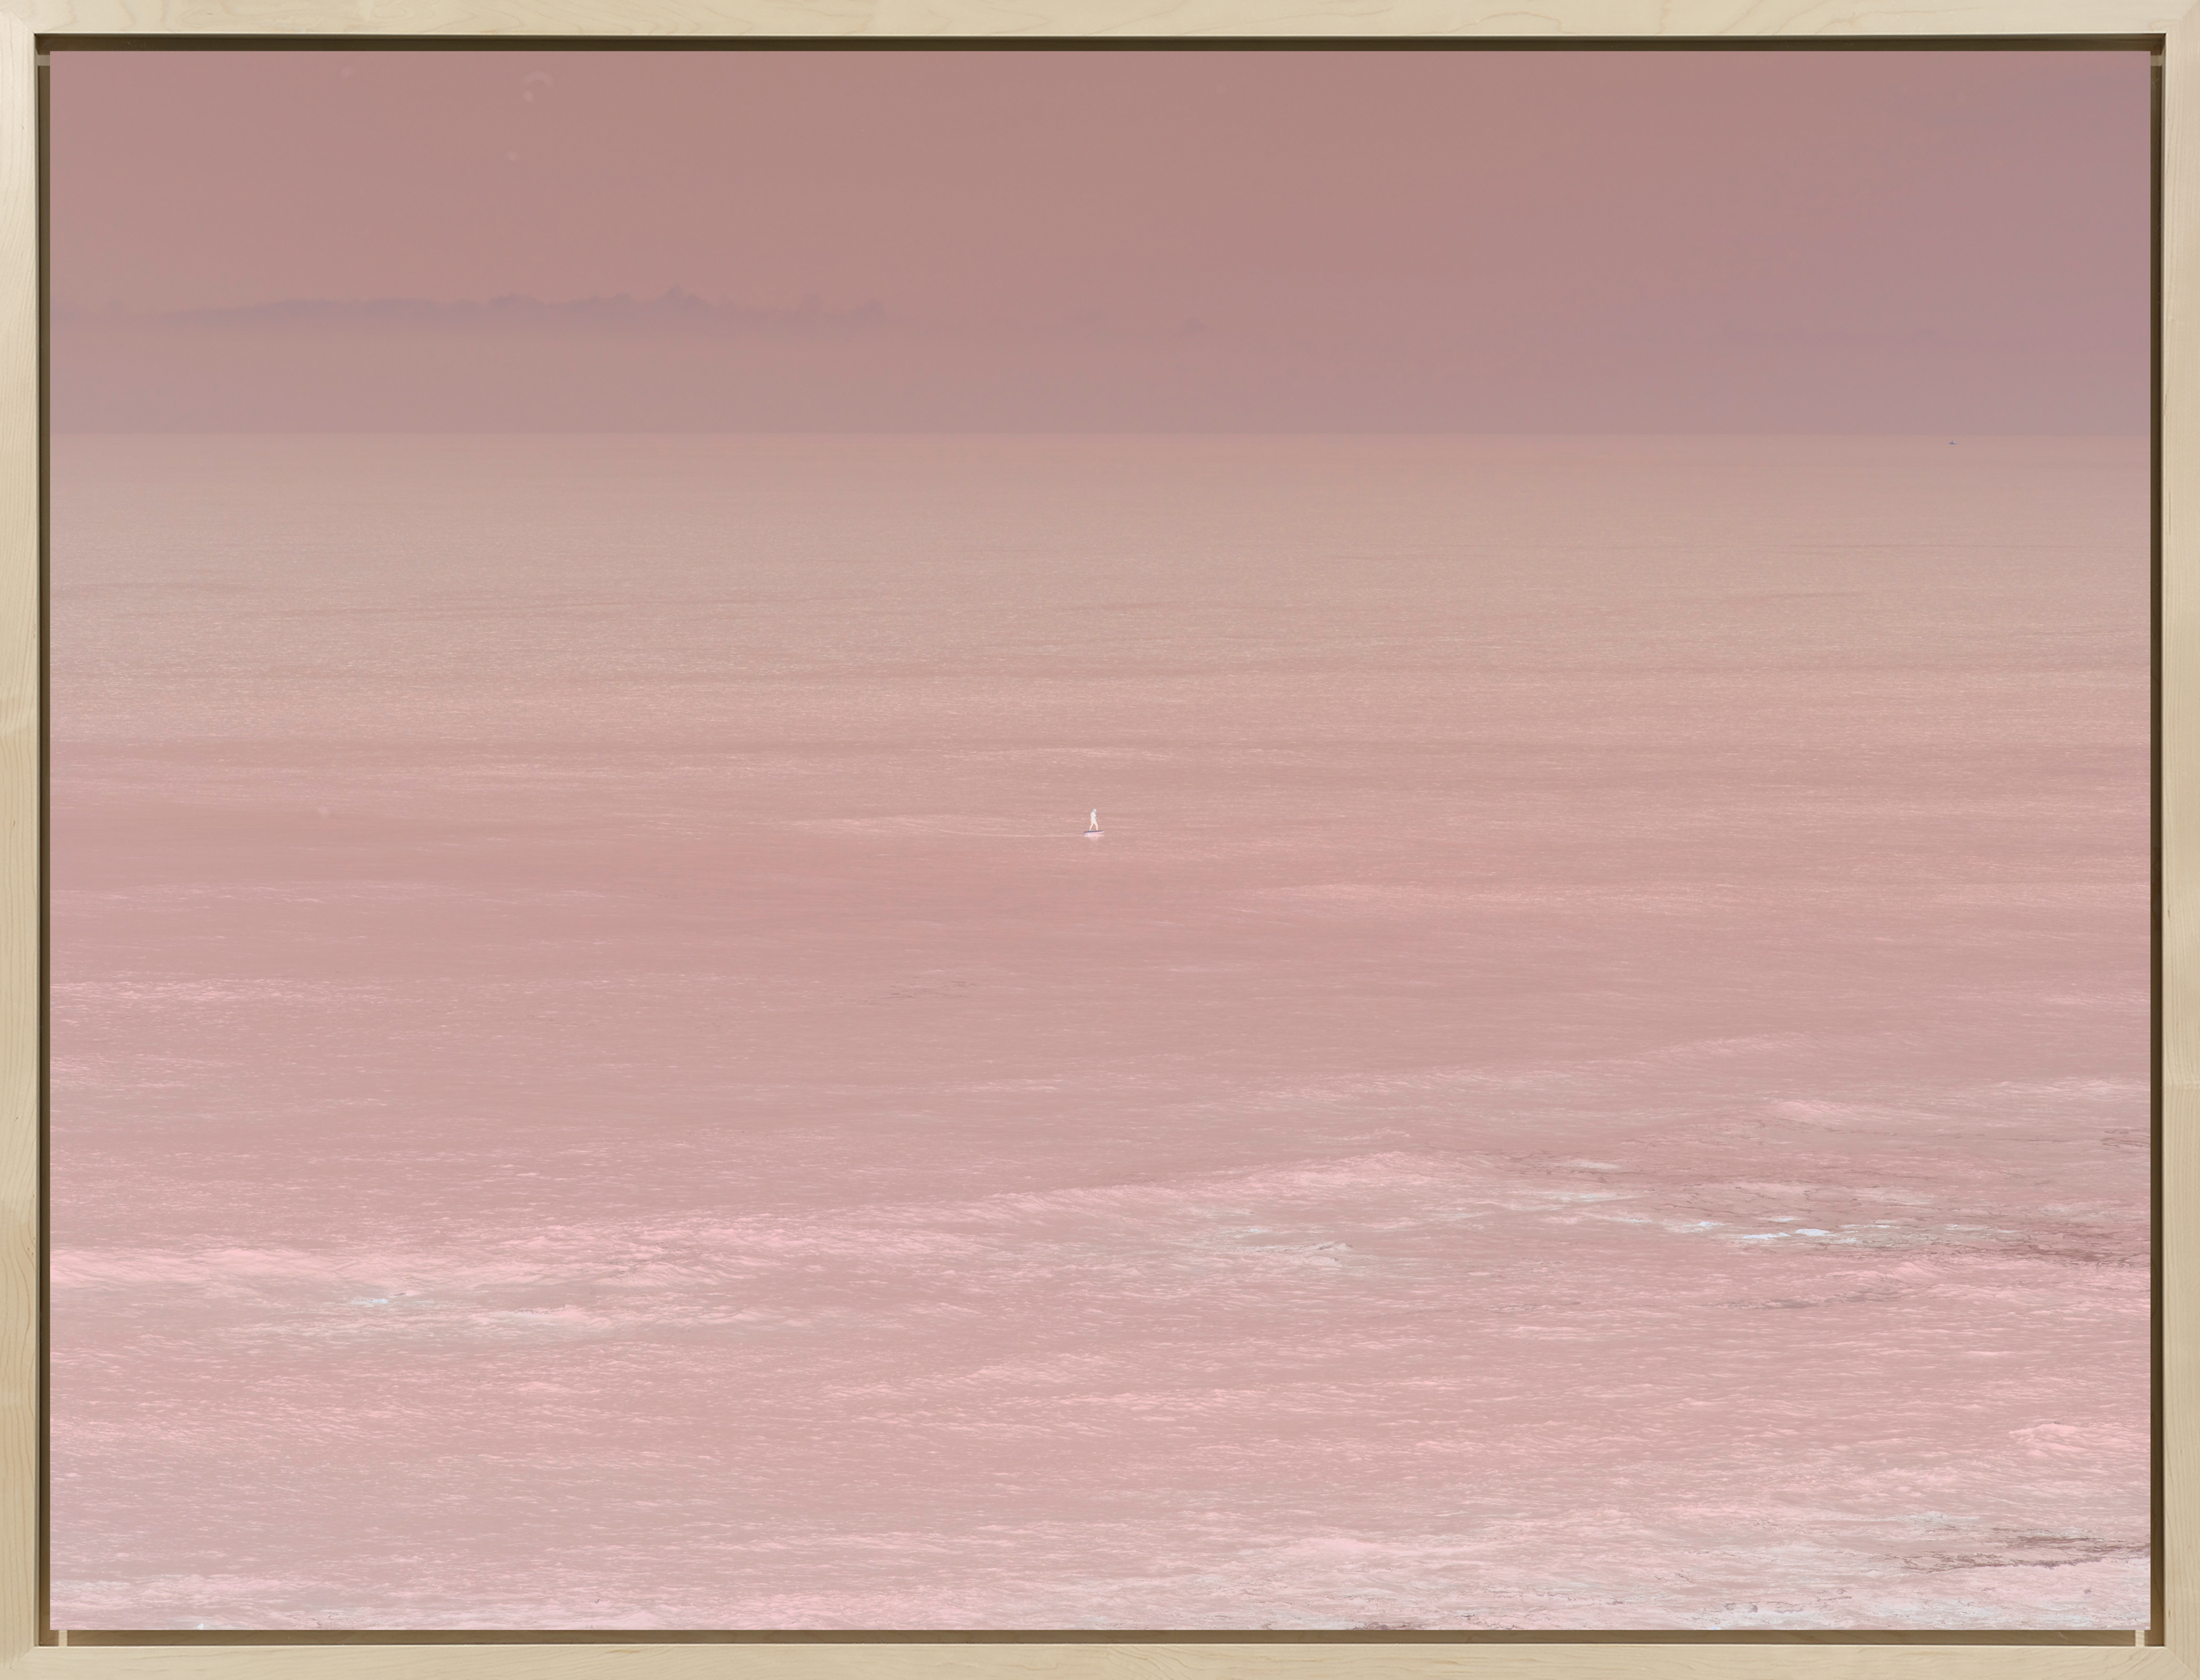 Color reversal photograph of a figure on a hydrofoil surfboard in the middle of calm pink waters framed in bleached wood